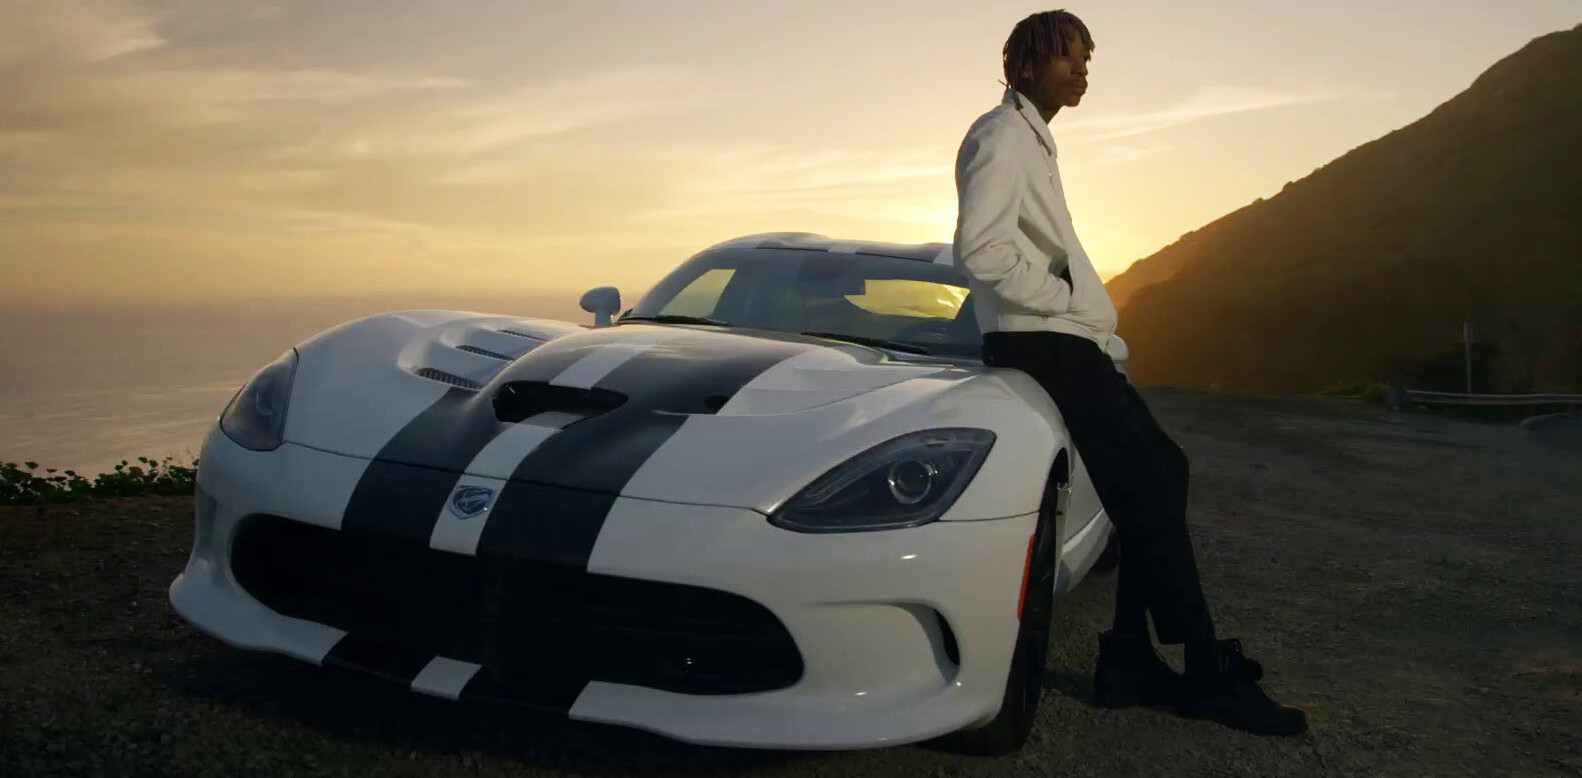 How much does Wiz Khalifa’s ‘See You Again’ earn as the most-watched YouTube video ever?